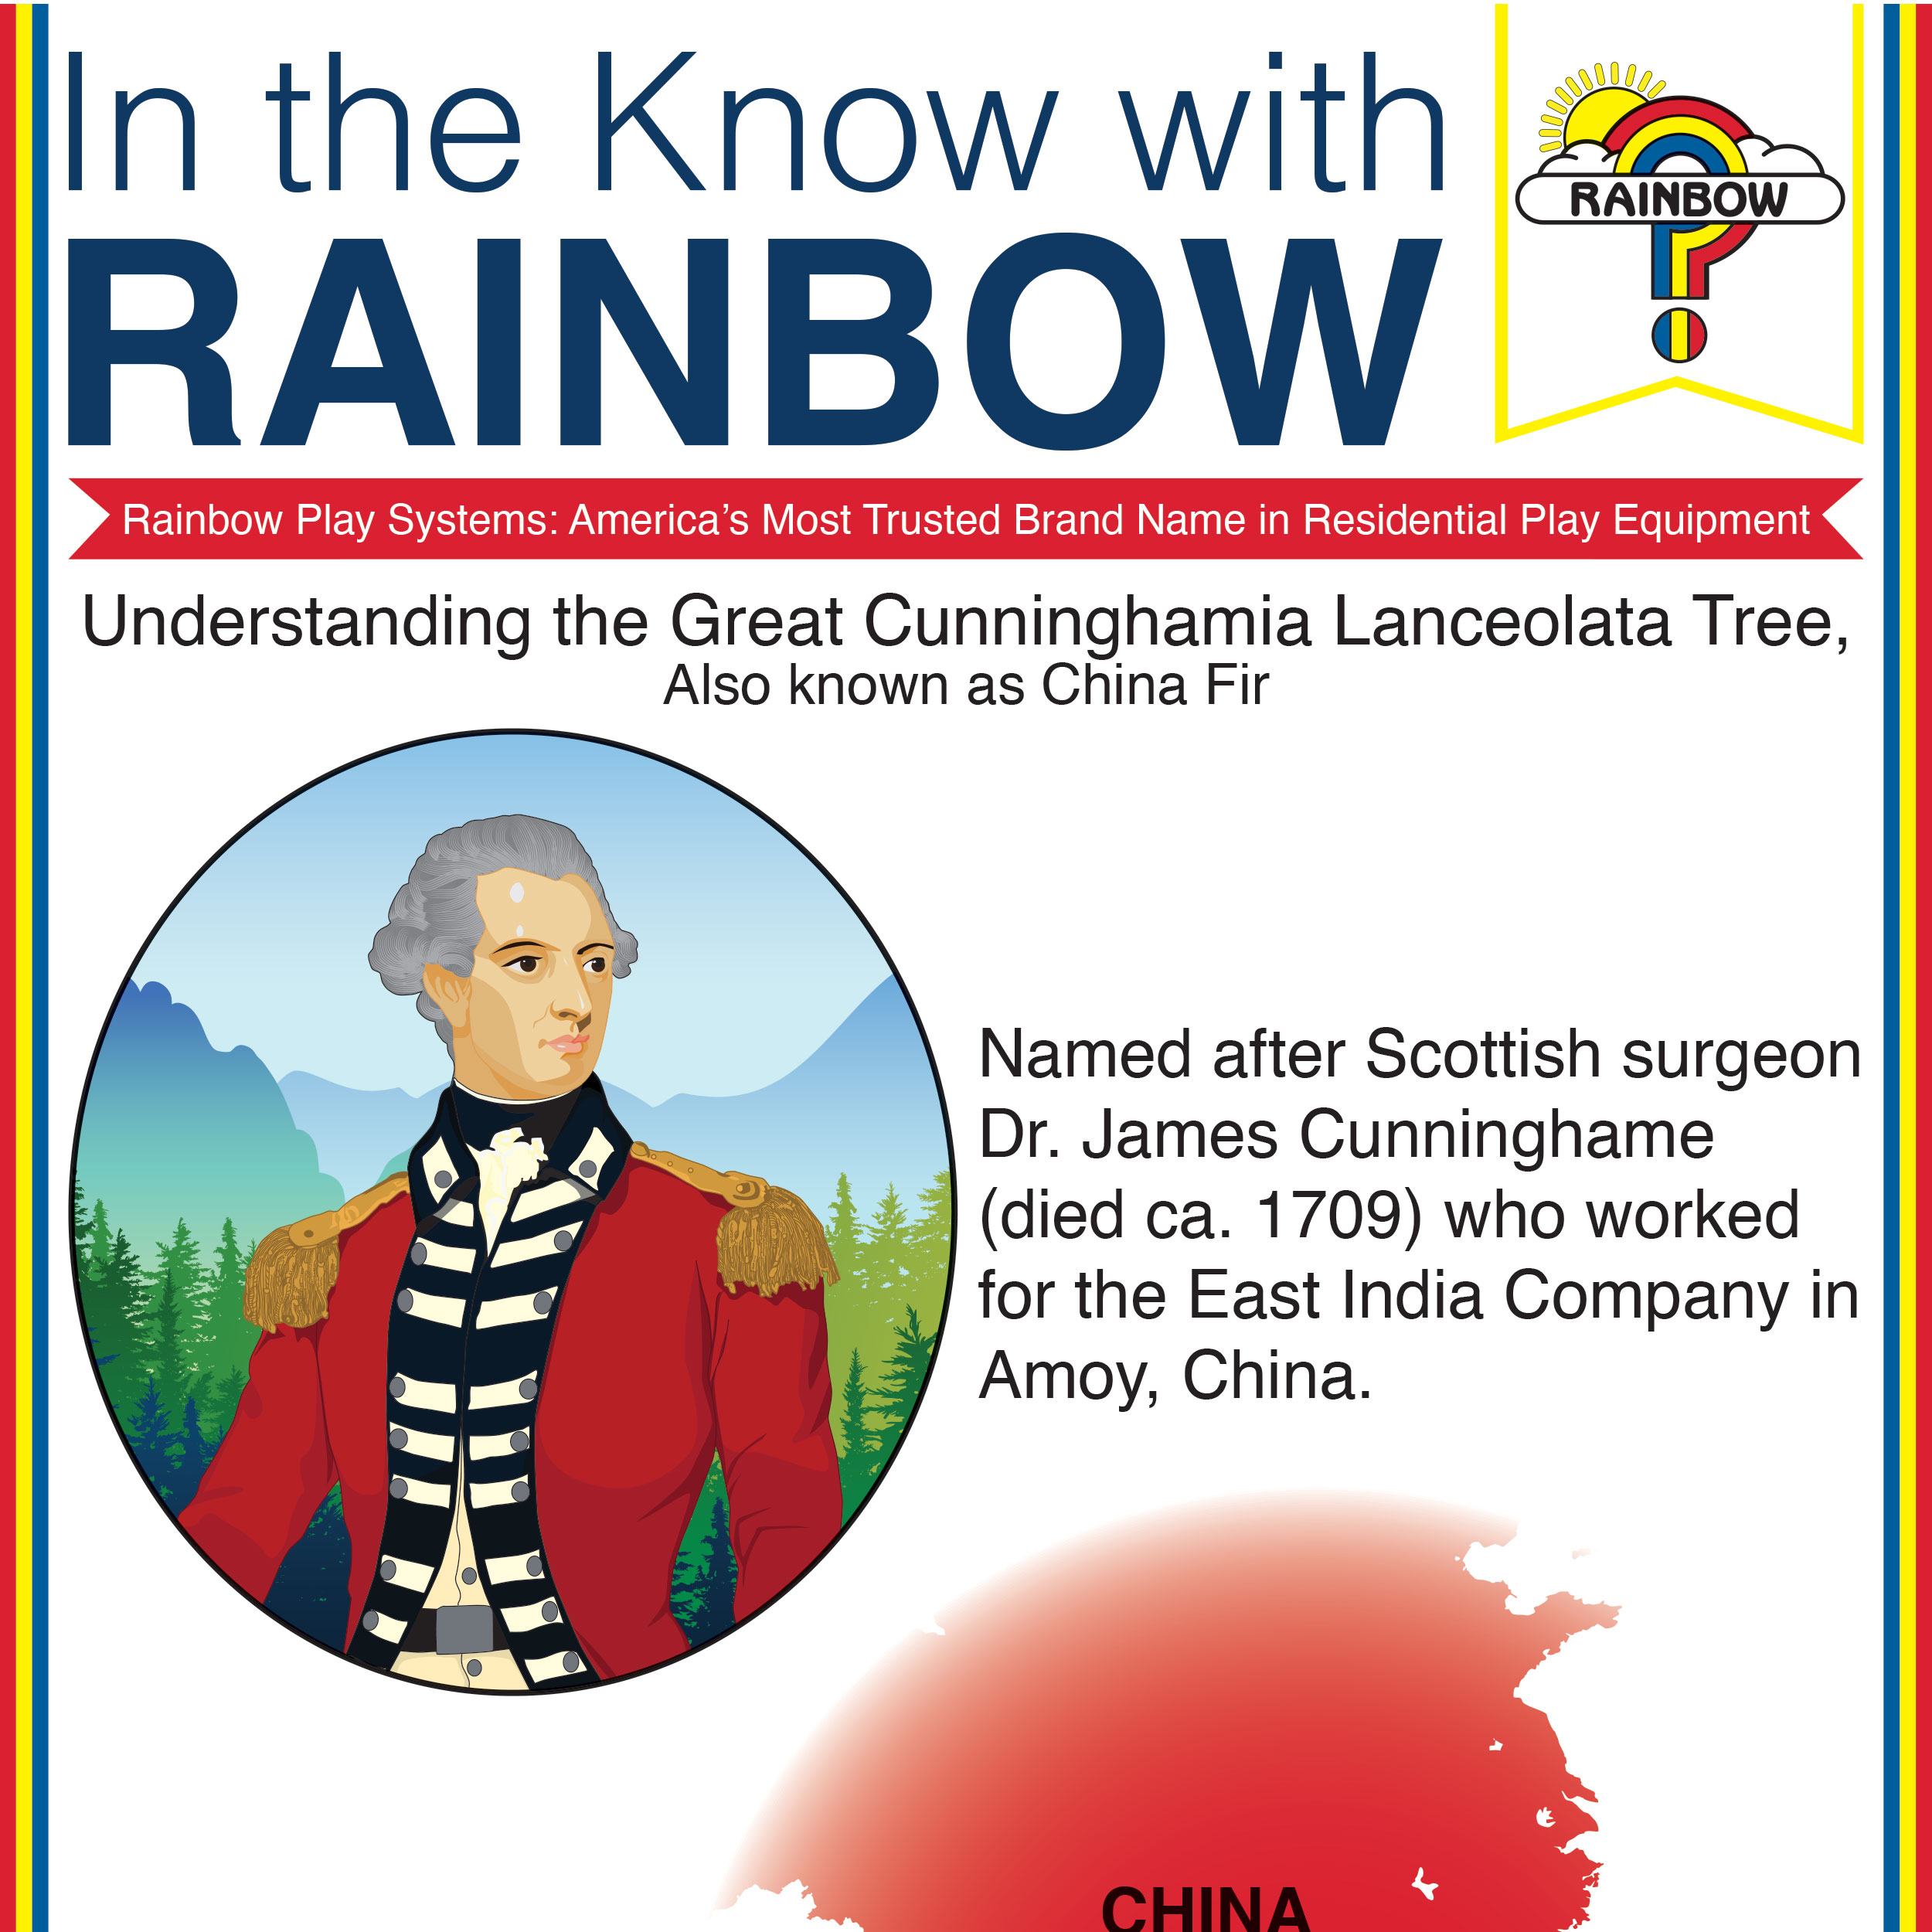 In the Know with Rainbow - Cunninghamia